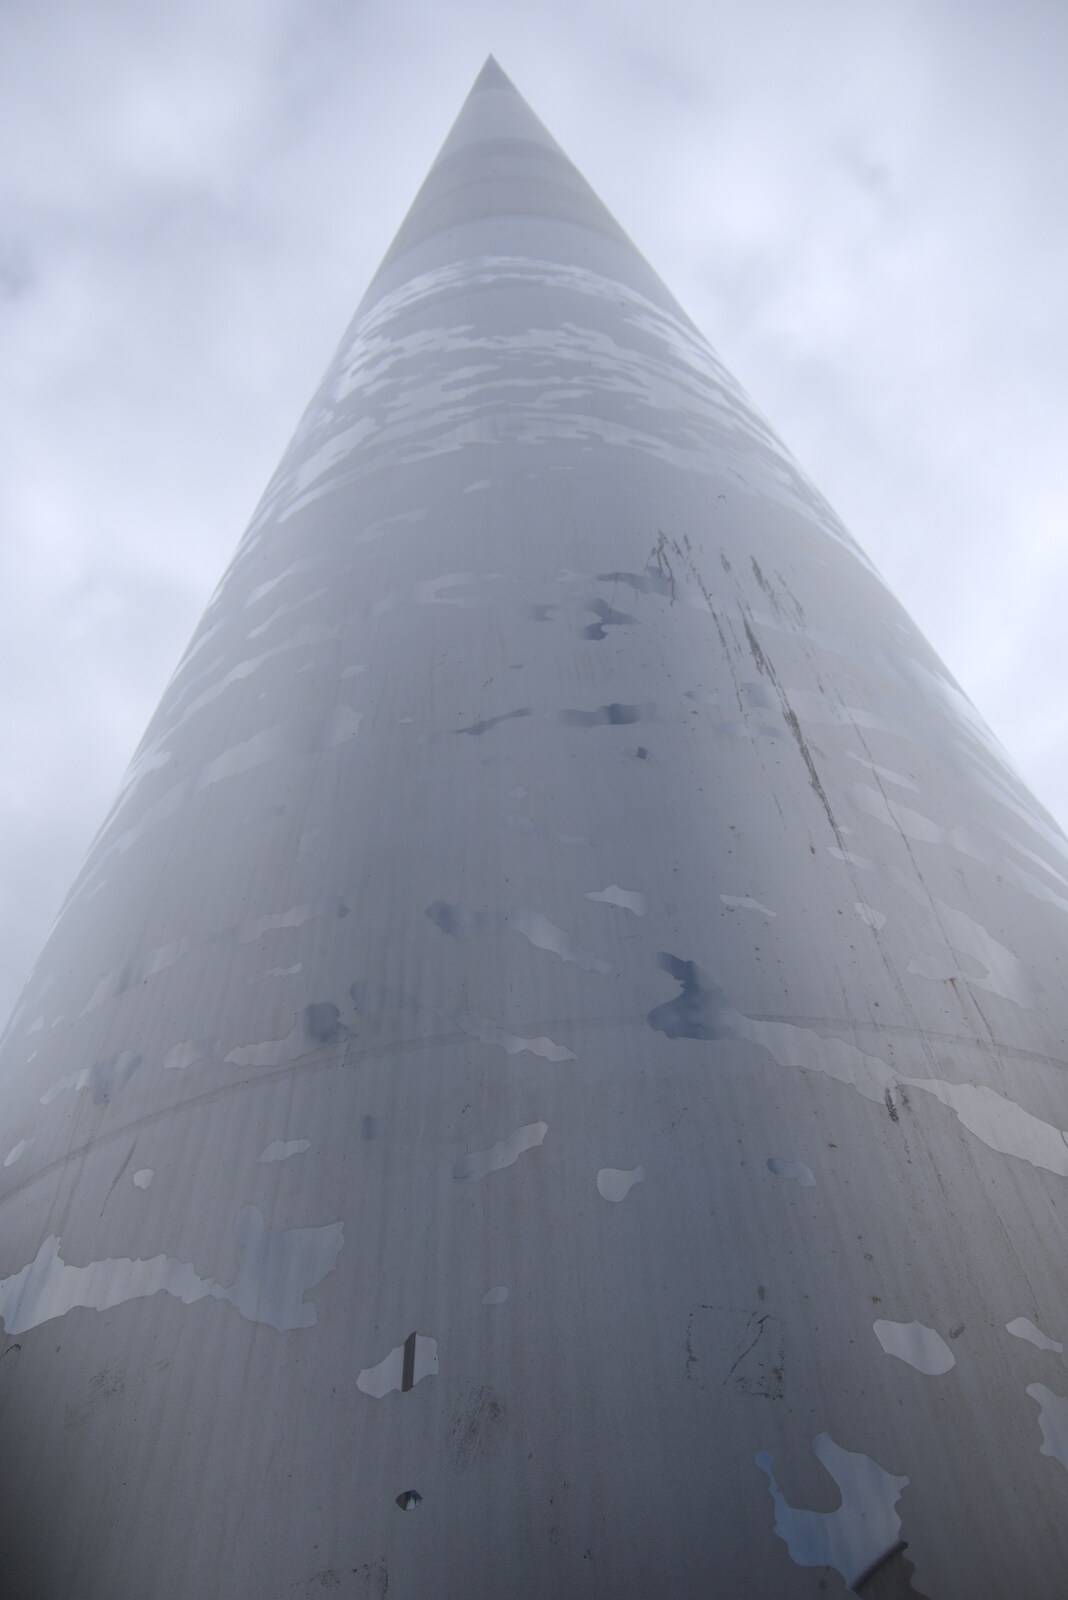 The 120-metre-high Monument of Light, or spike from A Trip to Noddy's, and Dublin City Centre, Wicklow and Dublin, Ireland - 16th August 2021